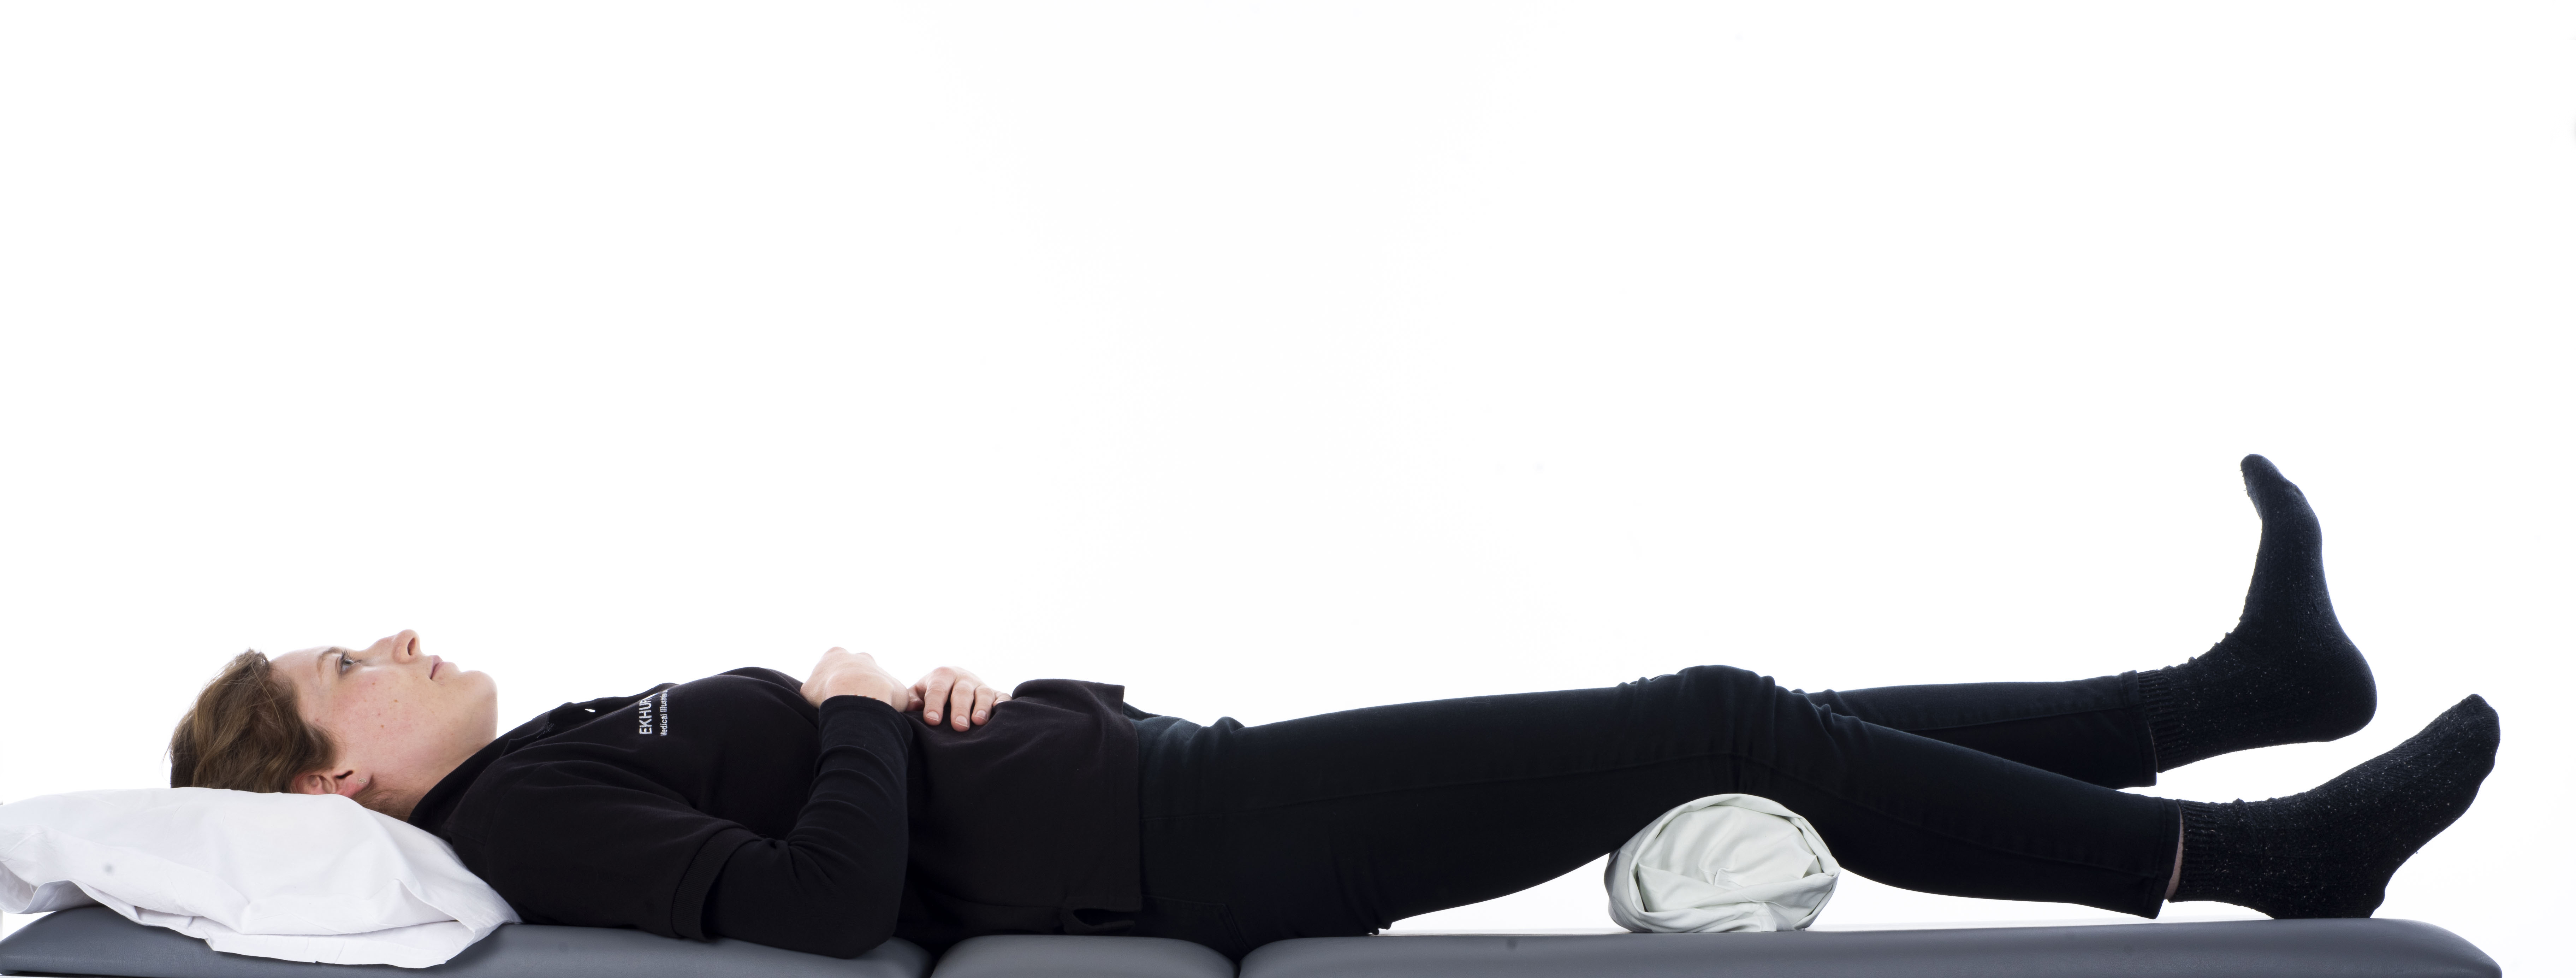 Heel lifts; with a rolled-up blanket under your knee, tense your thigh muscle and lift your heel off the bed